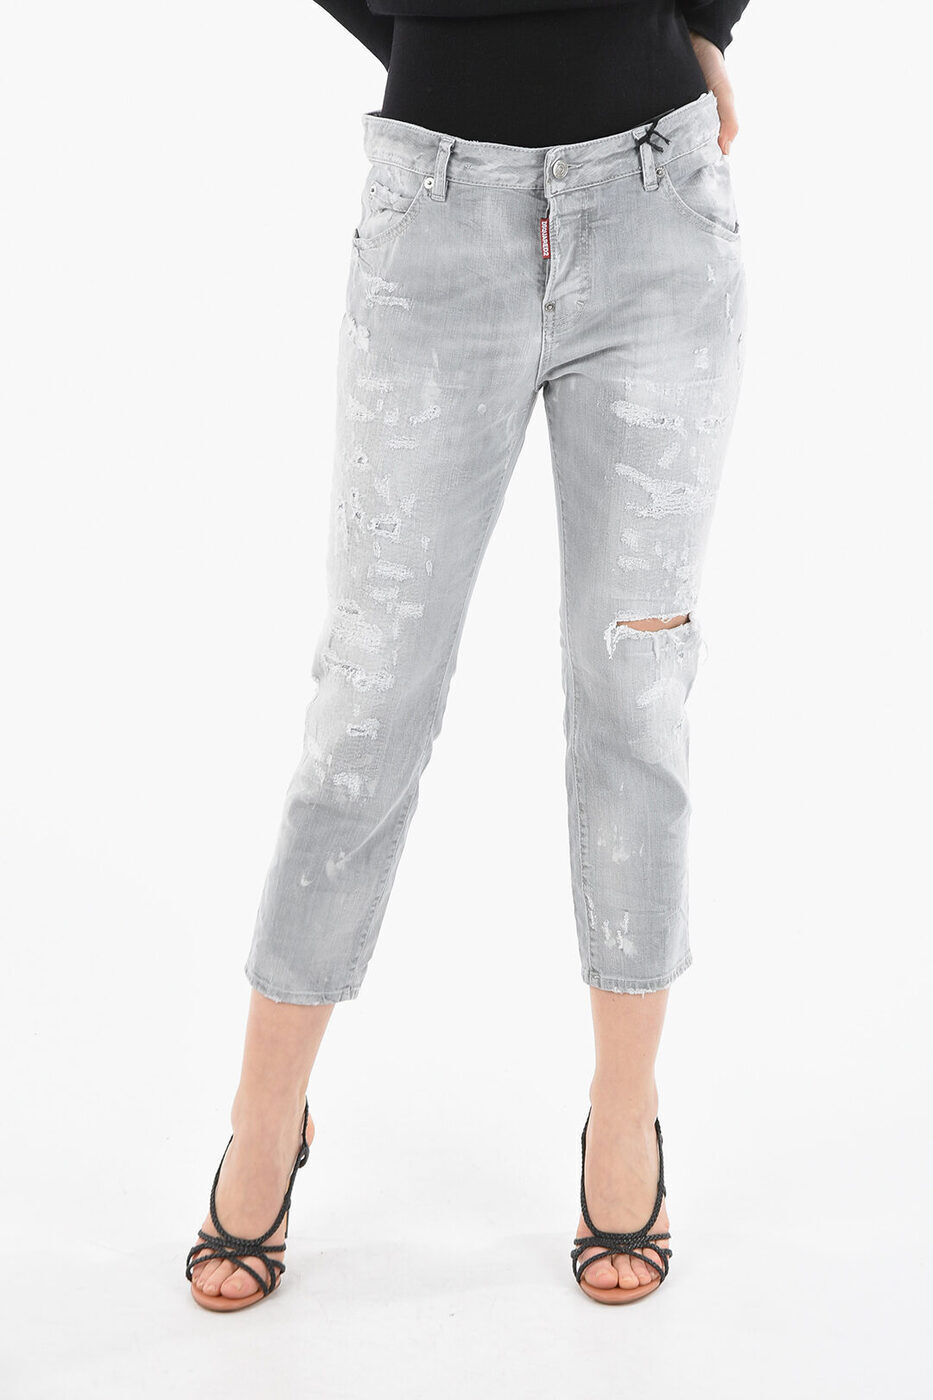 DSQUARED2 ディースクエアード デニム S75LB0588 S30260 852 レディース CROPPED COOL GIRL DENIMS WITH DISTRESSED EFFECT 18CM 【関税・送料無料】【ラッピング無料】 dk